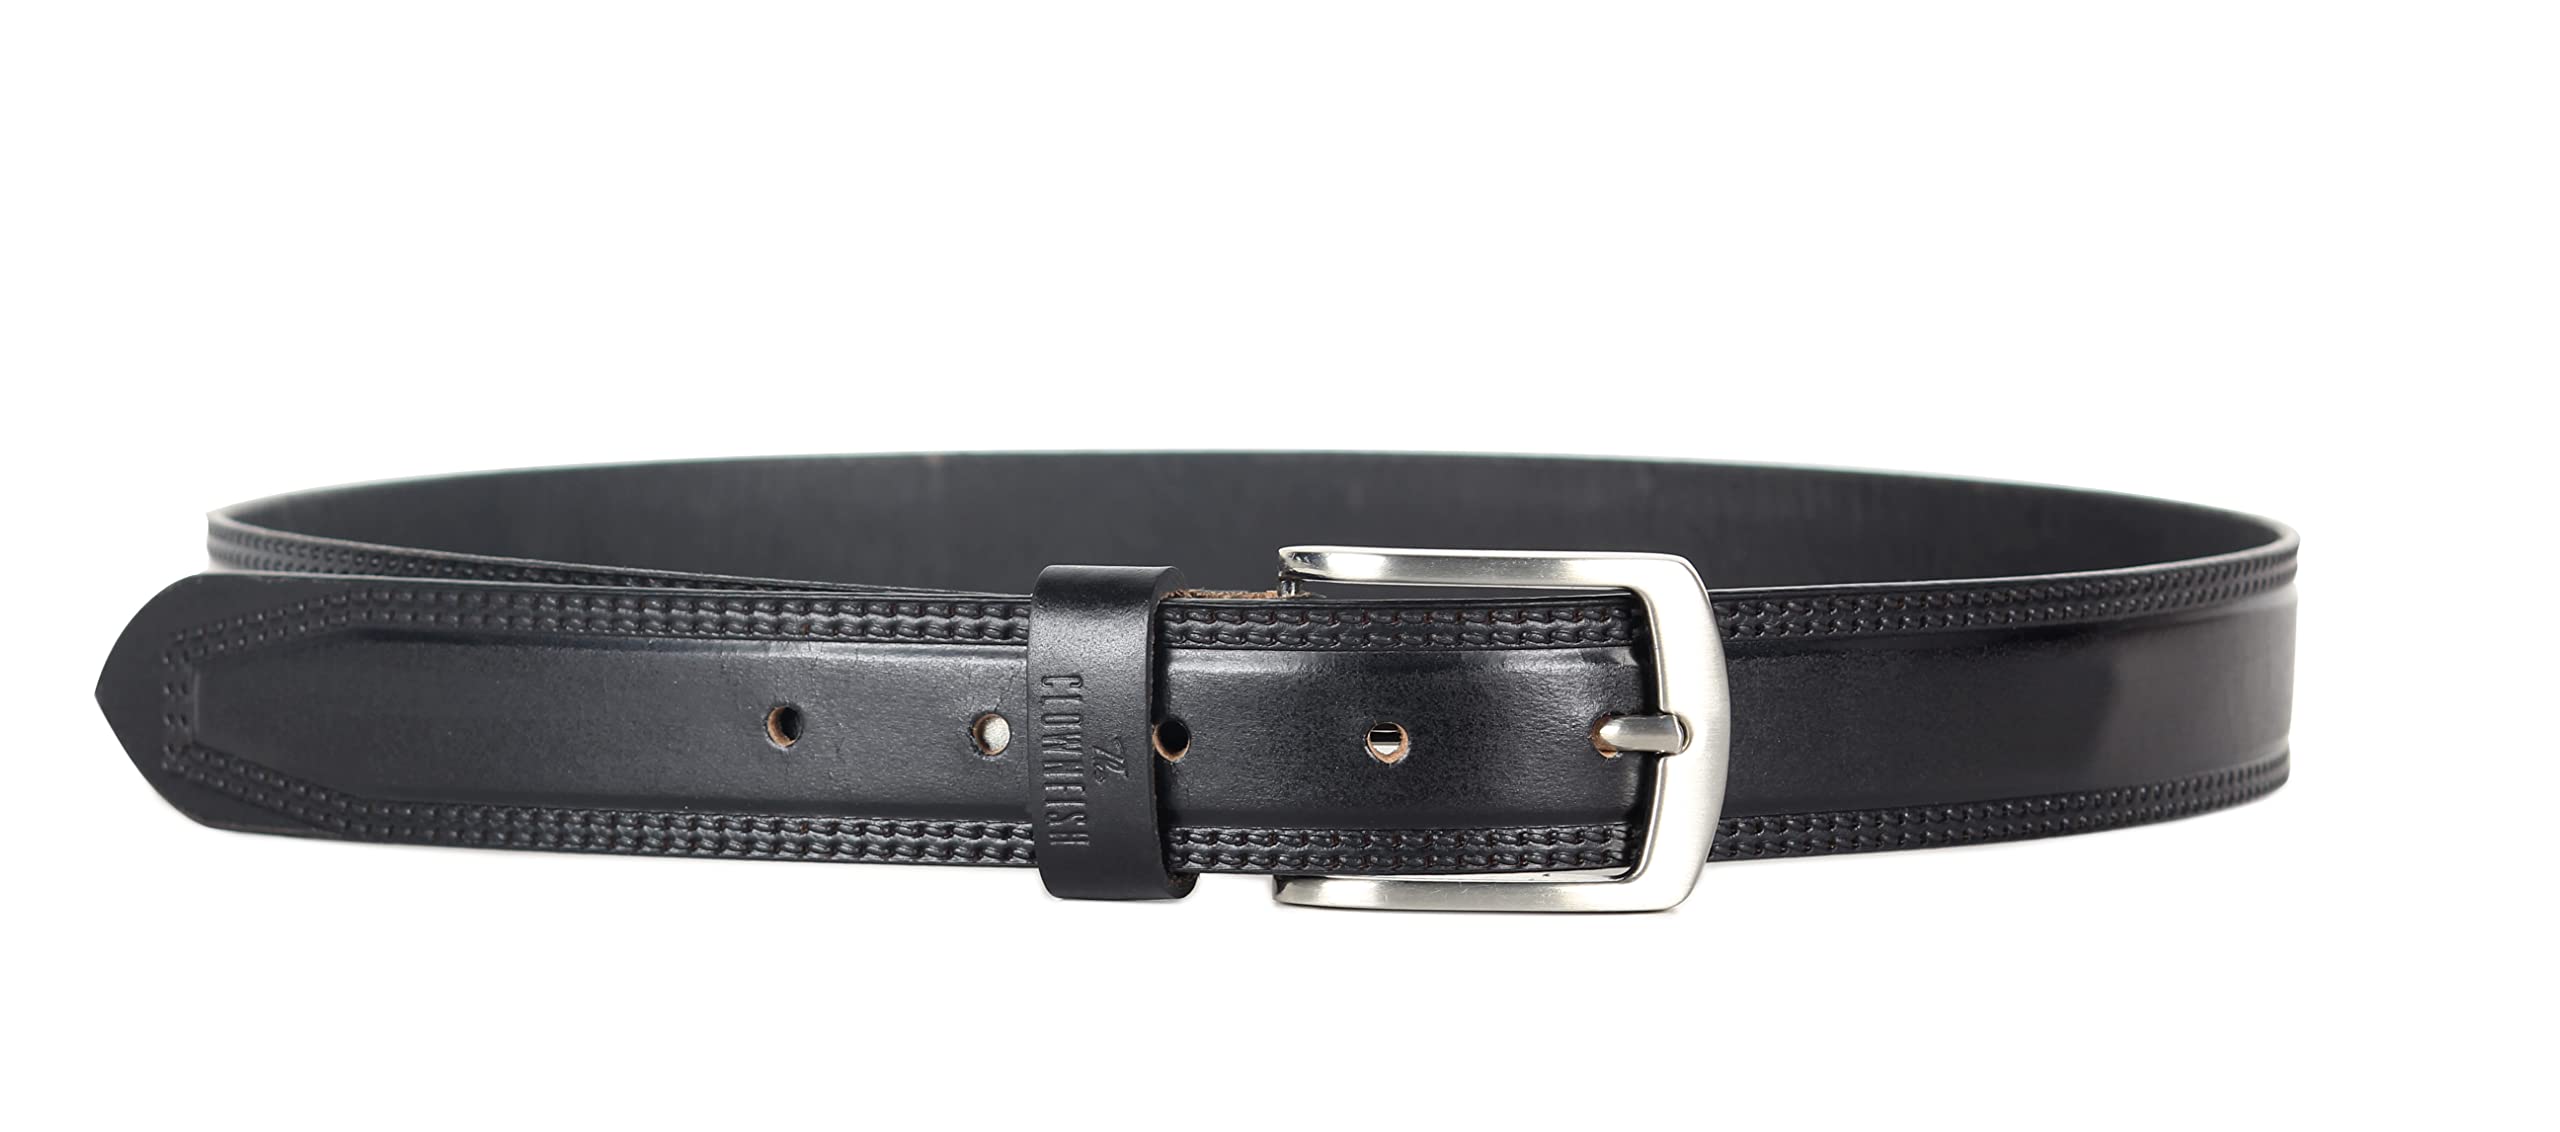 THE CLOWNFISH Men's Genuine Leather Belt with Textured/Embossed Design-Coal Black (Size-40 inches)